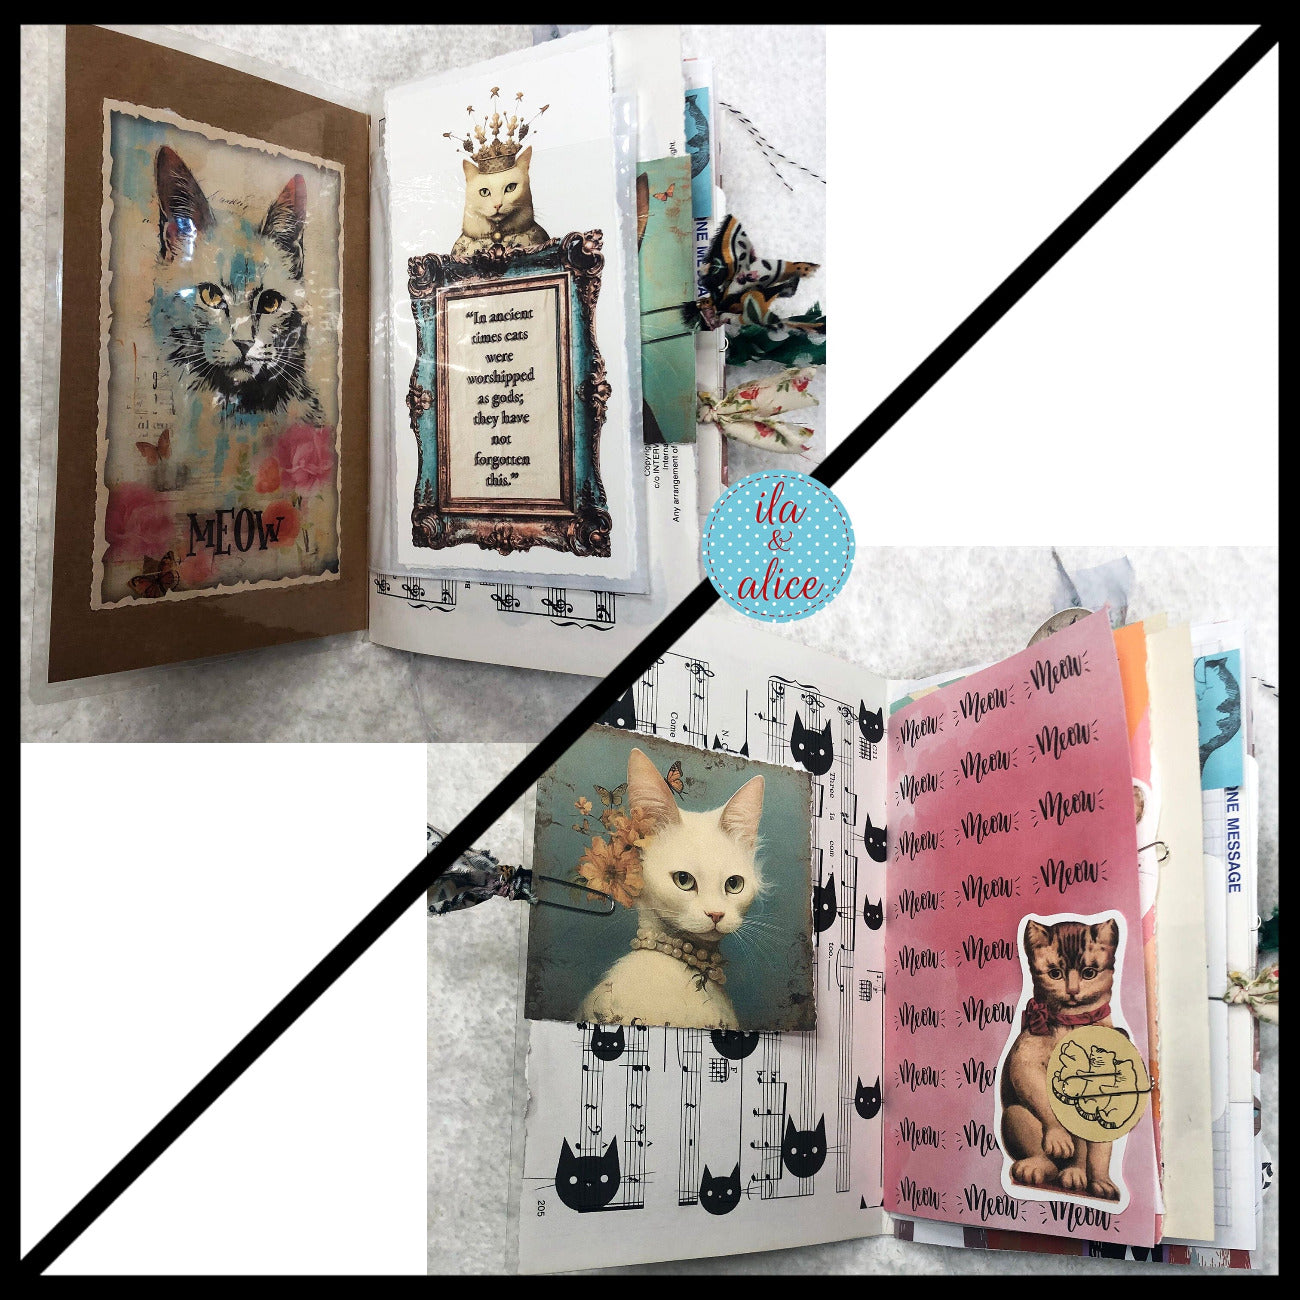 Fetching Feline Cat Junk Journal with Collage Cover Journal ila & alice 